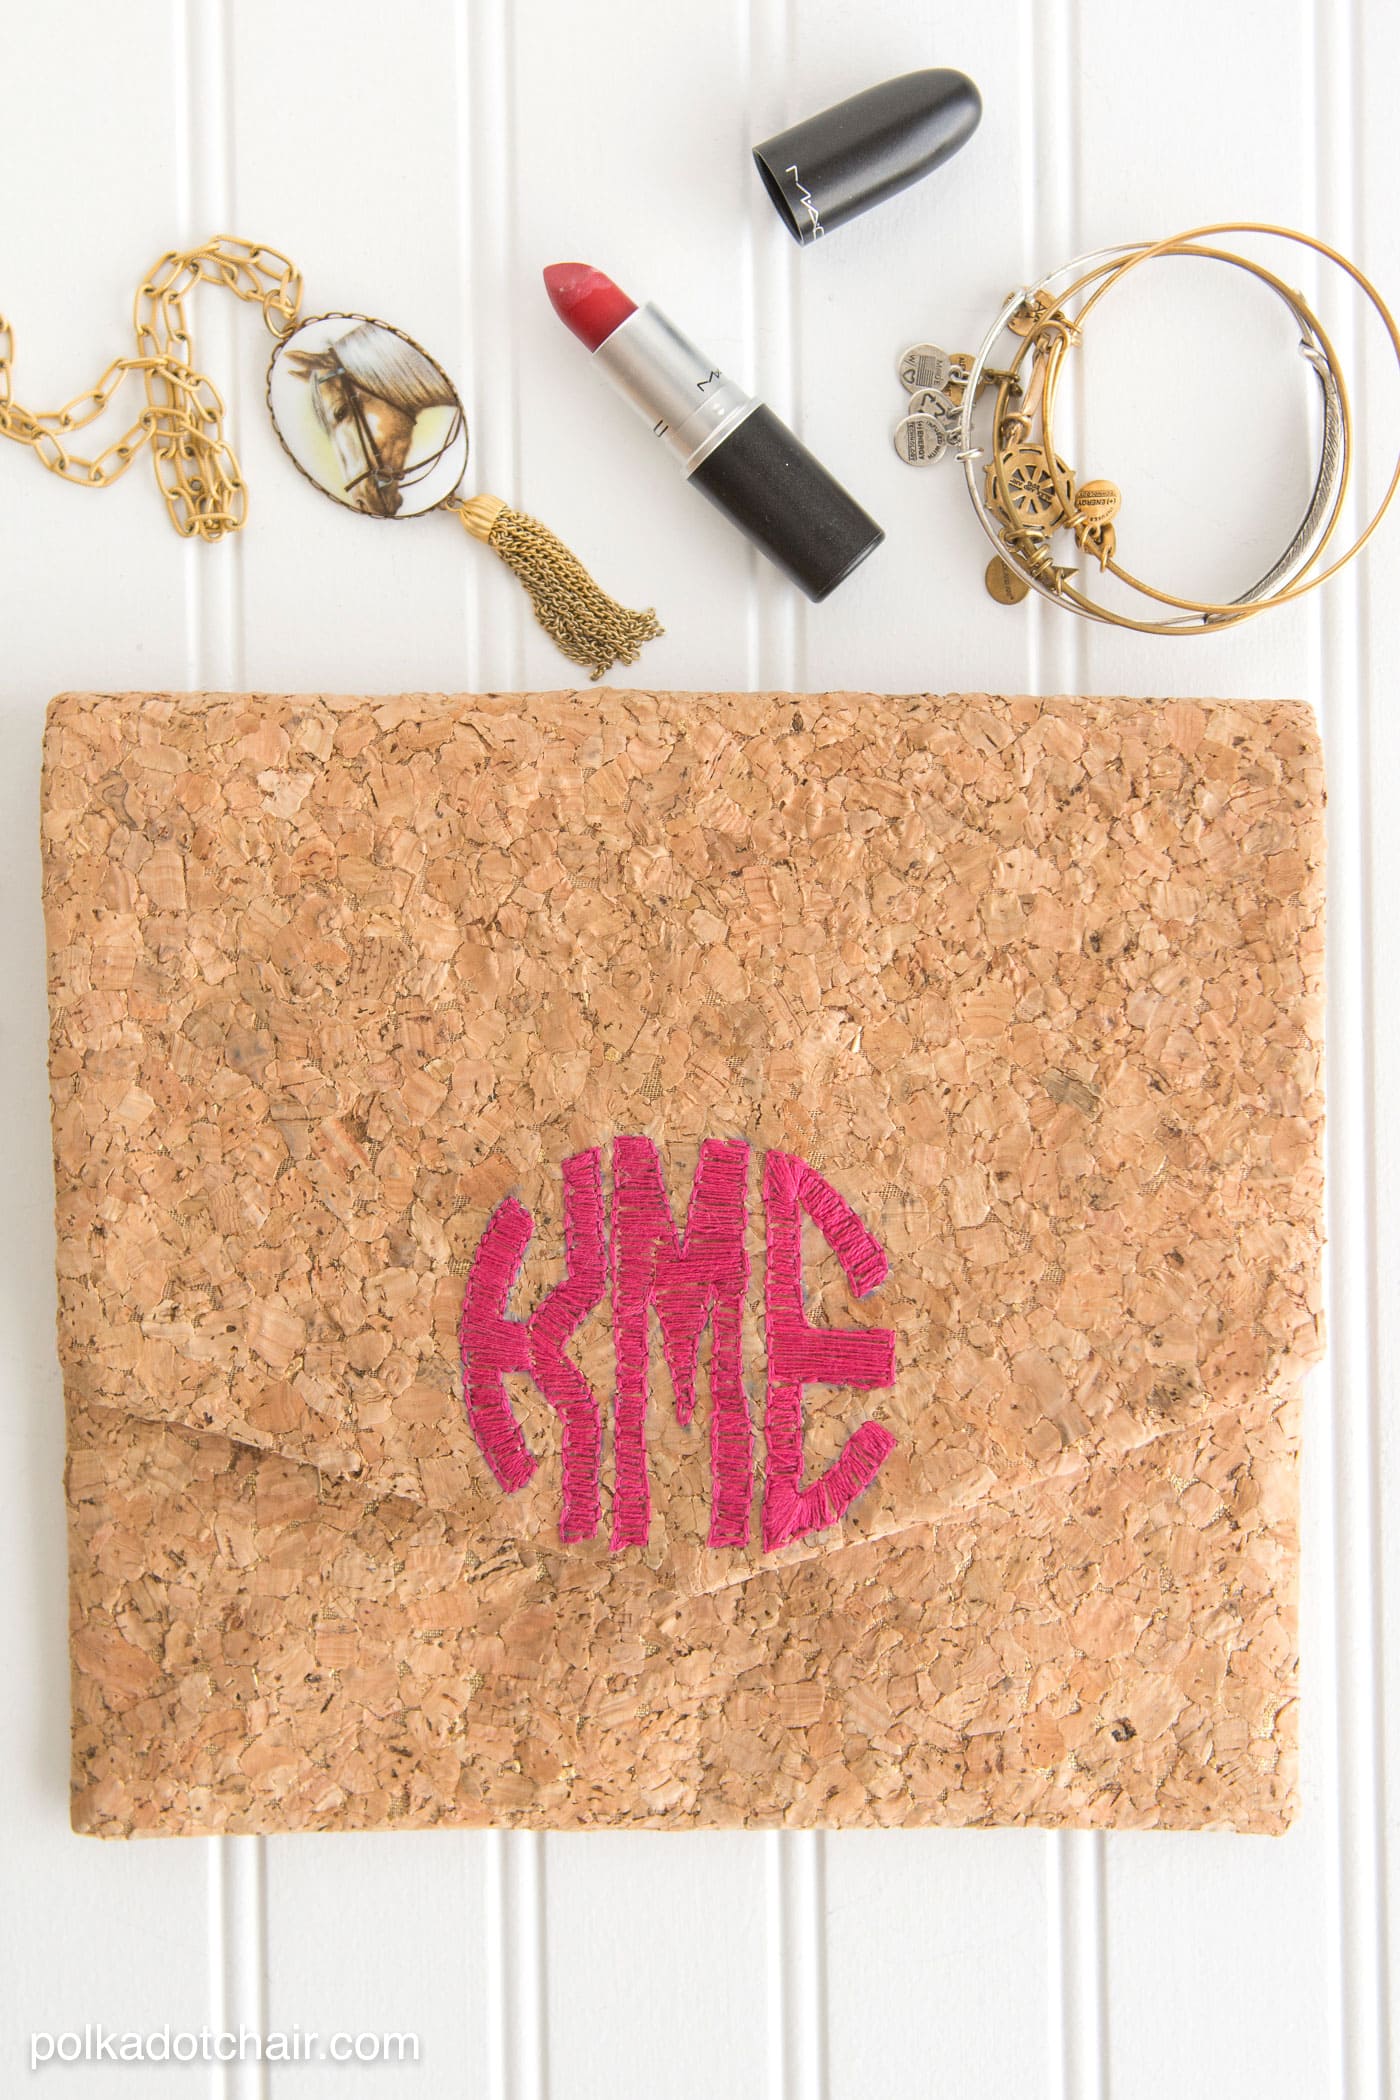 Free sewing pattern for a DIY Monogrammed Cork Clutch on polkadotchair.com